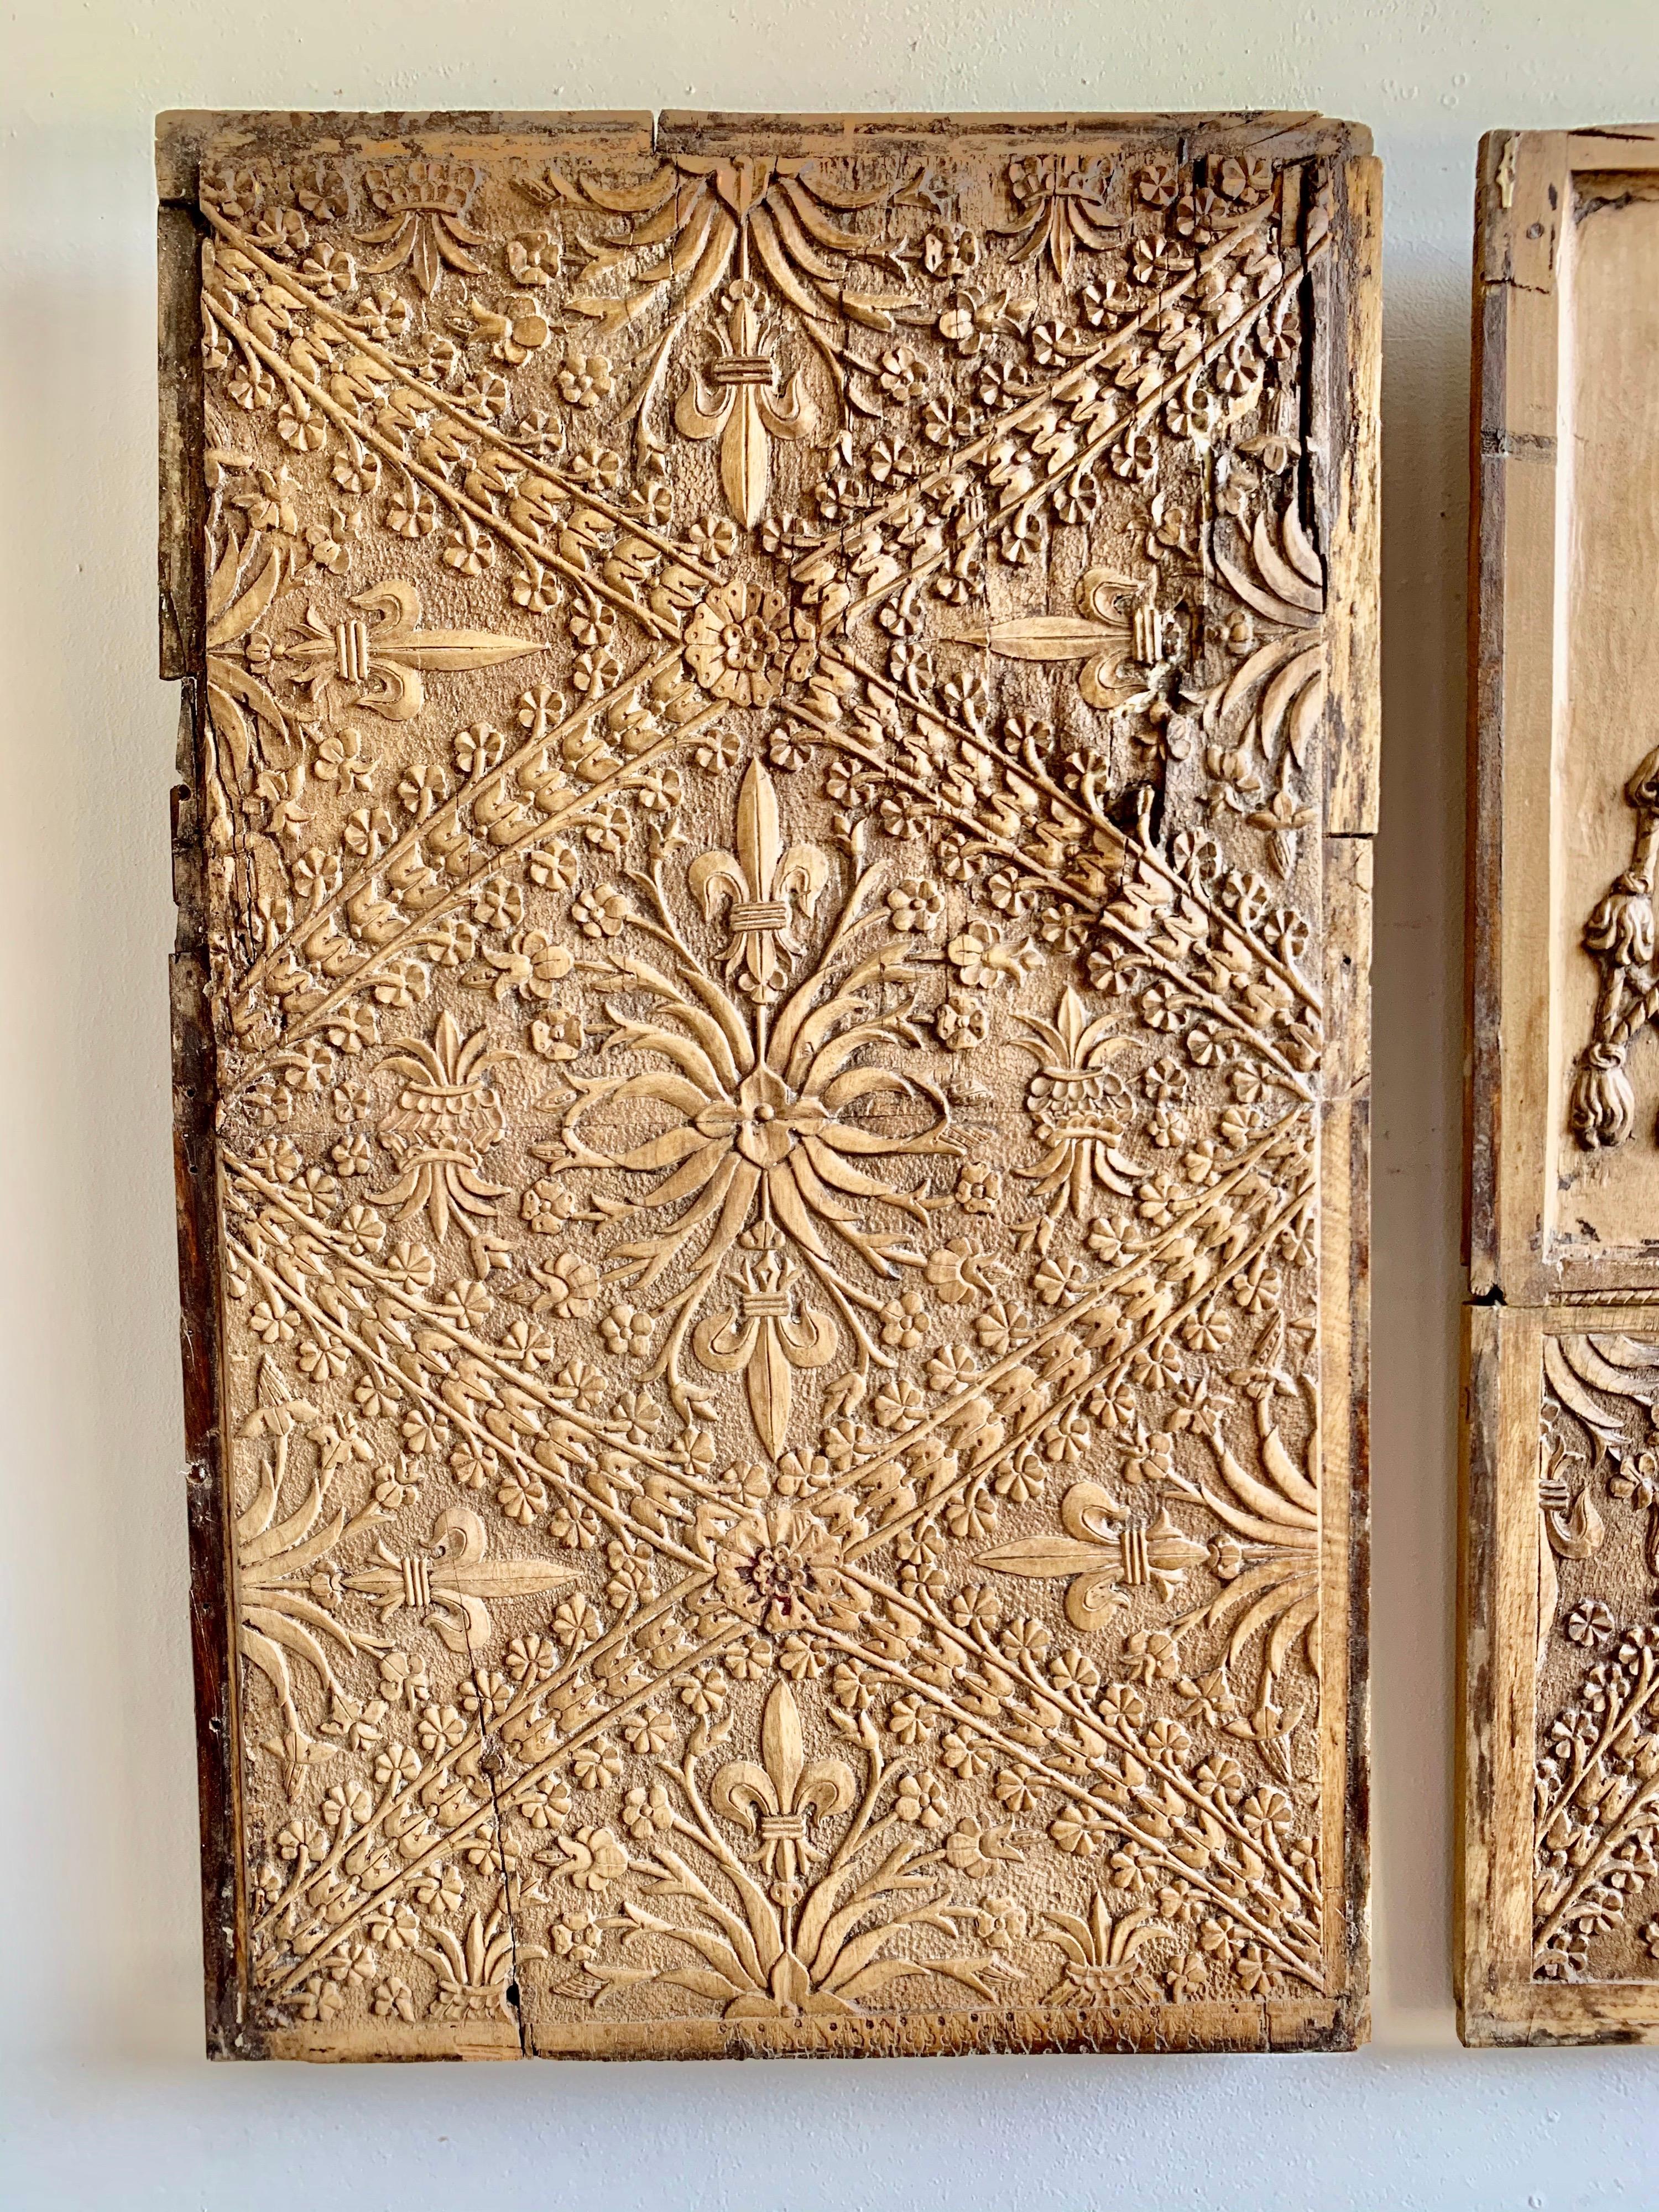 Set of 18th century Spanish wood panels with fine hand carved details throughout. The center panel has a shield that is draped with carved tassels. Crossed swords are in the center with fleur-de-lis throughout. The hat with tassels is the emblem of